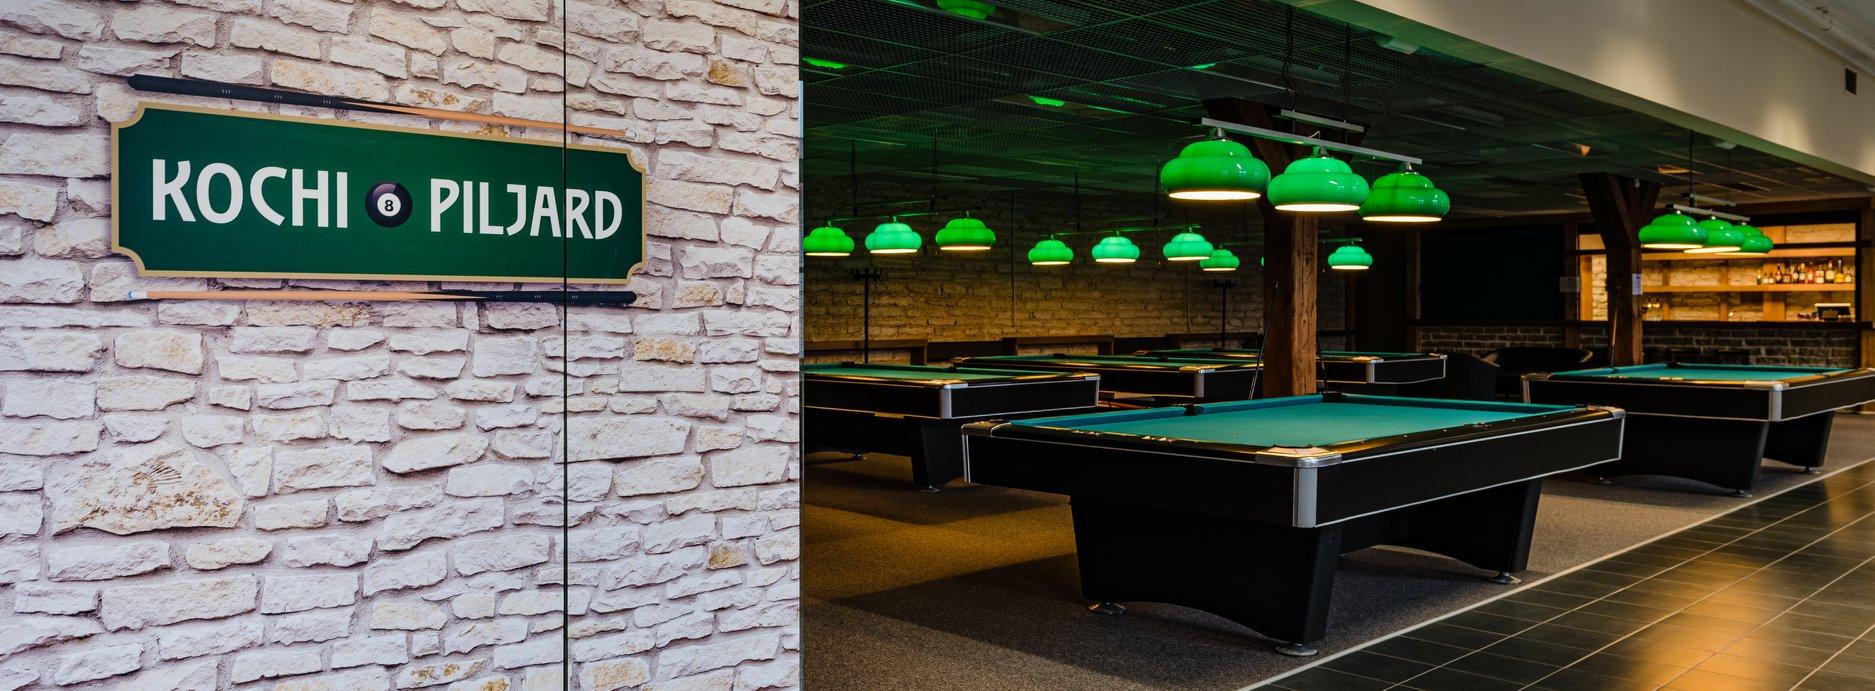 Billiards tables, green ceiling lamps